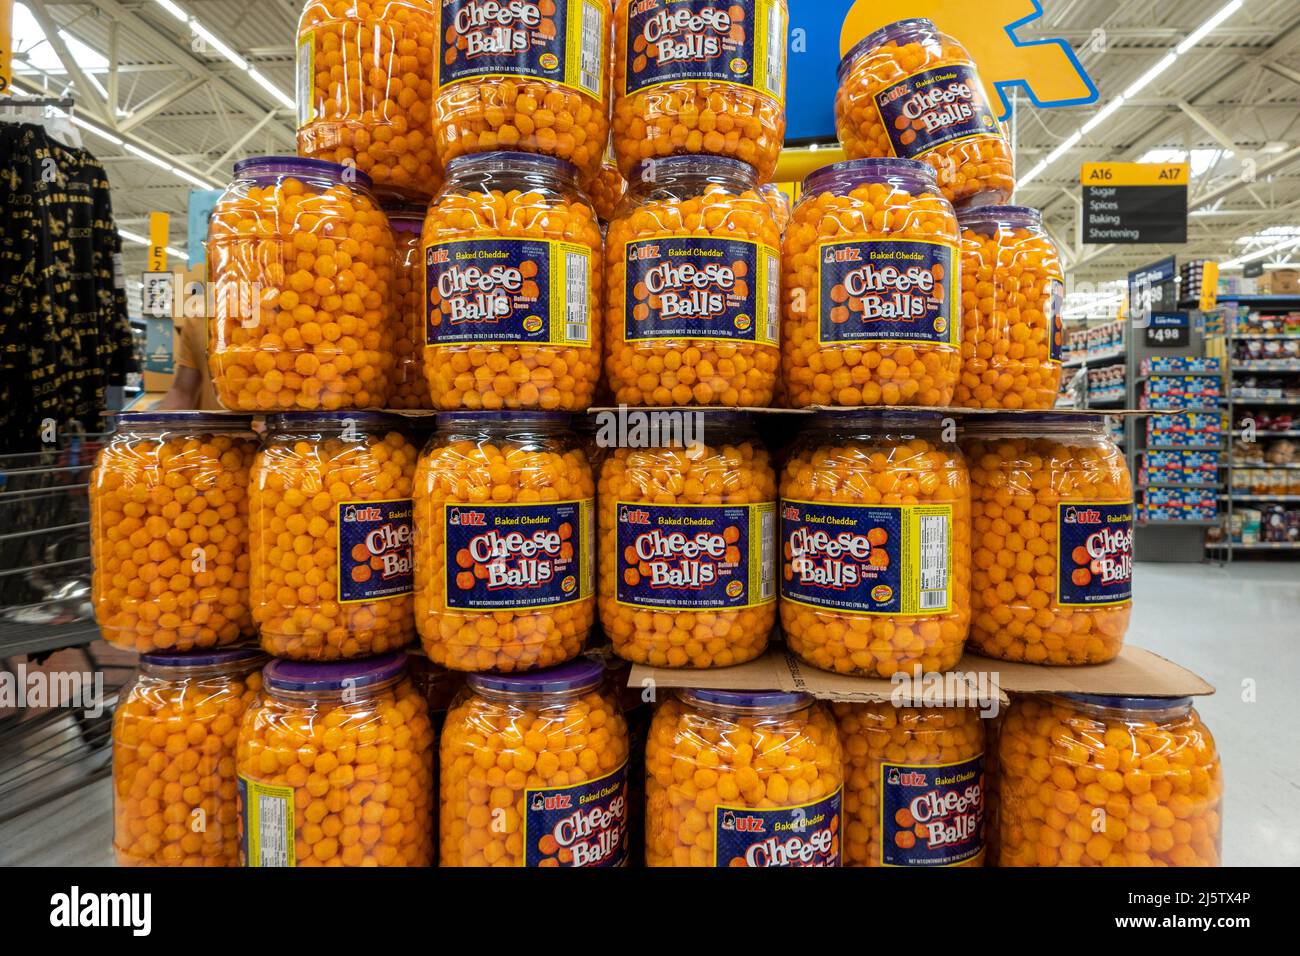 Big stack of Jars, Barrels with Baked Cheddar Cheese Balls by Utz in US supermarket. Stock Photo